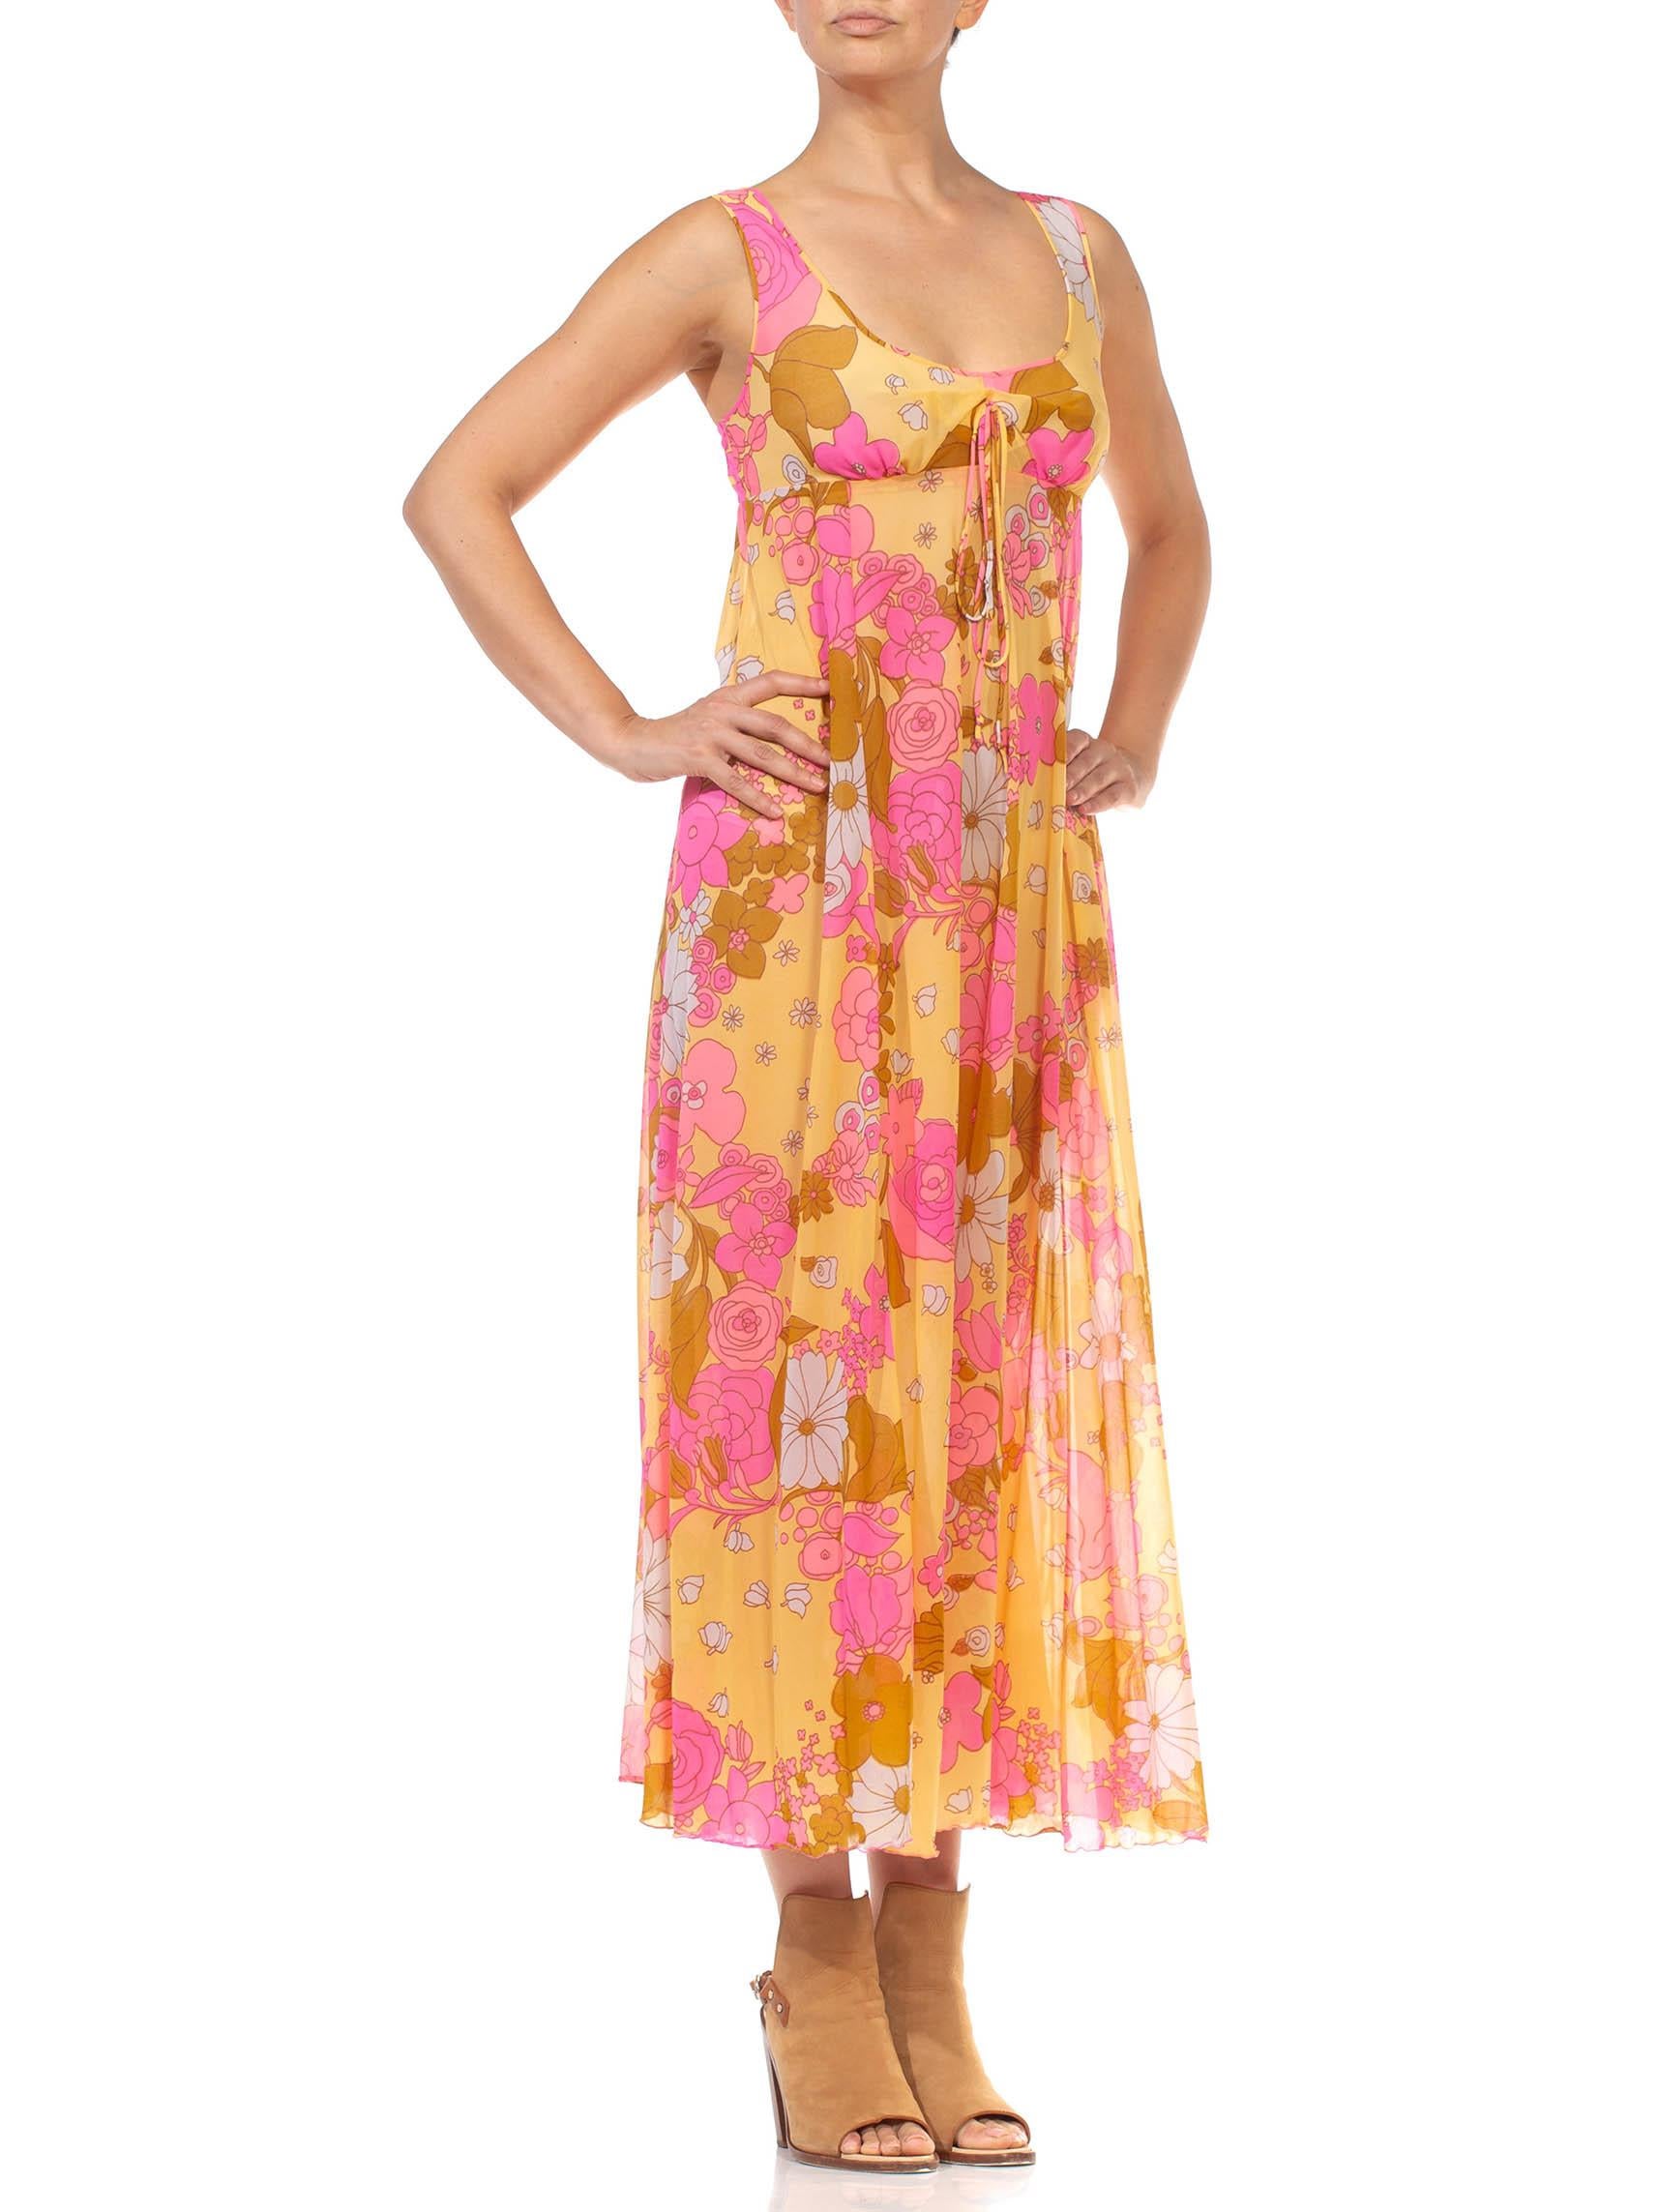 1970S Pink & Yellow Nylon Tricot Jersey Floral Print Empire Waist Negligee Dress 5